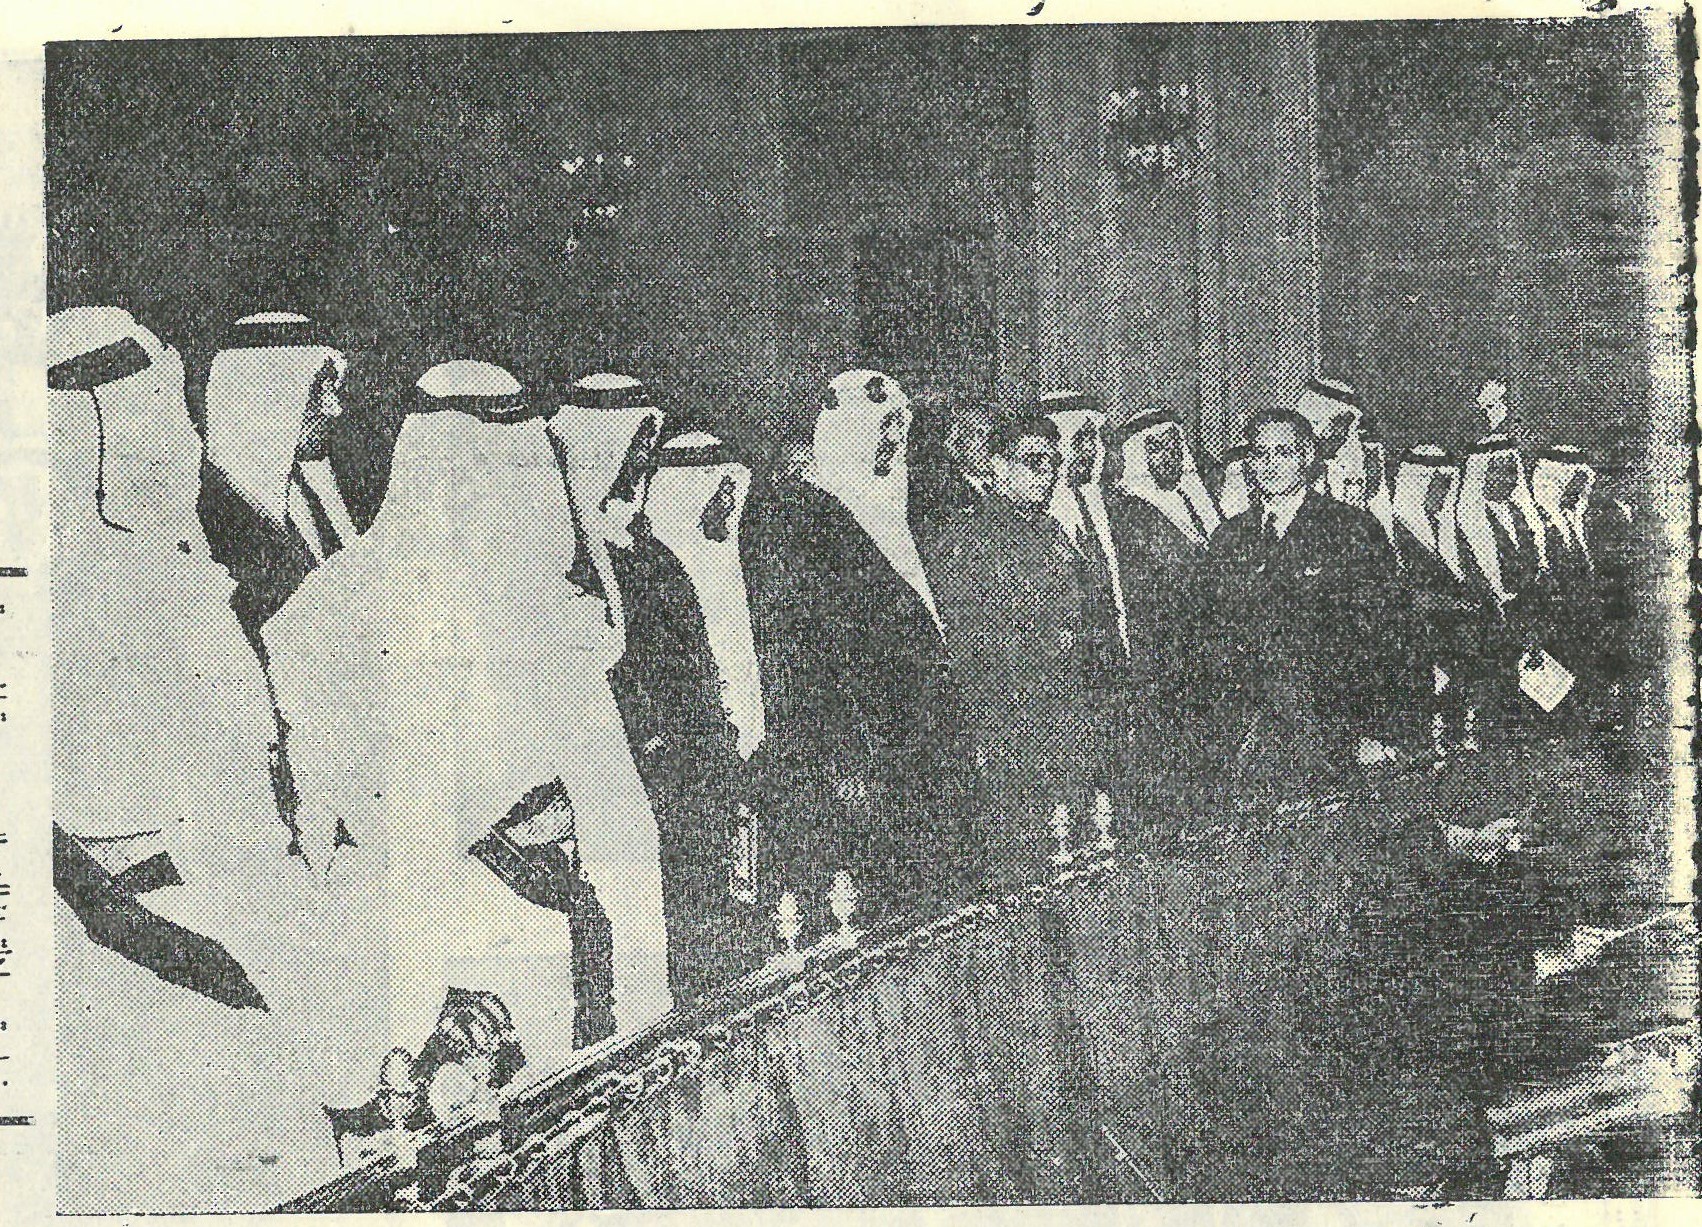 King Saud during his visit to Egypt in 1954